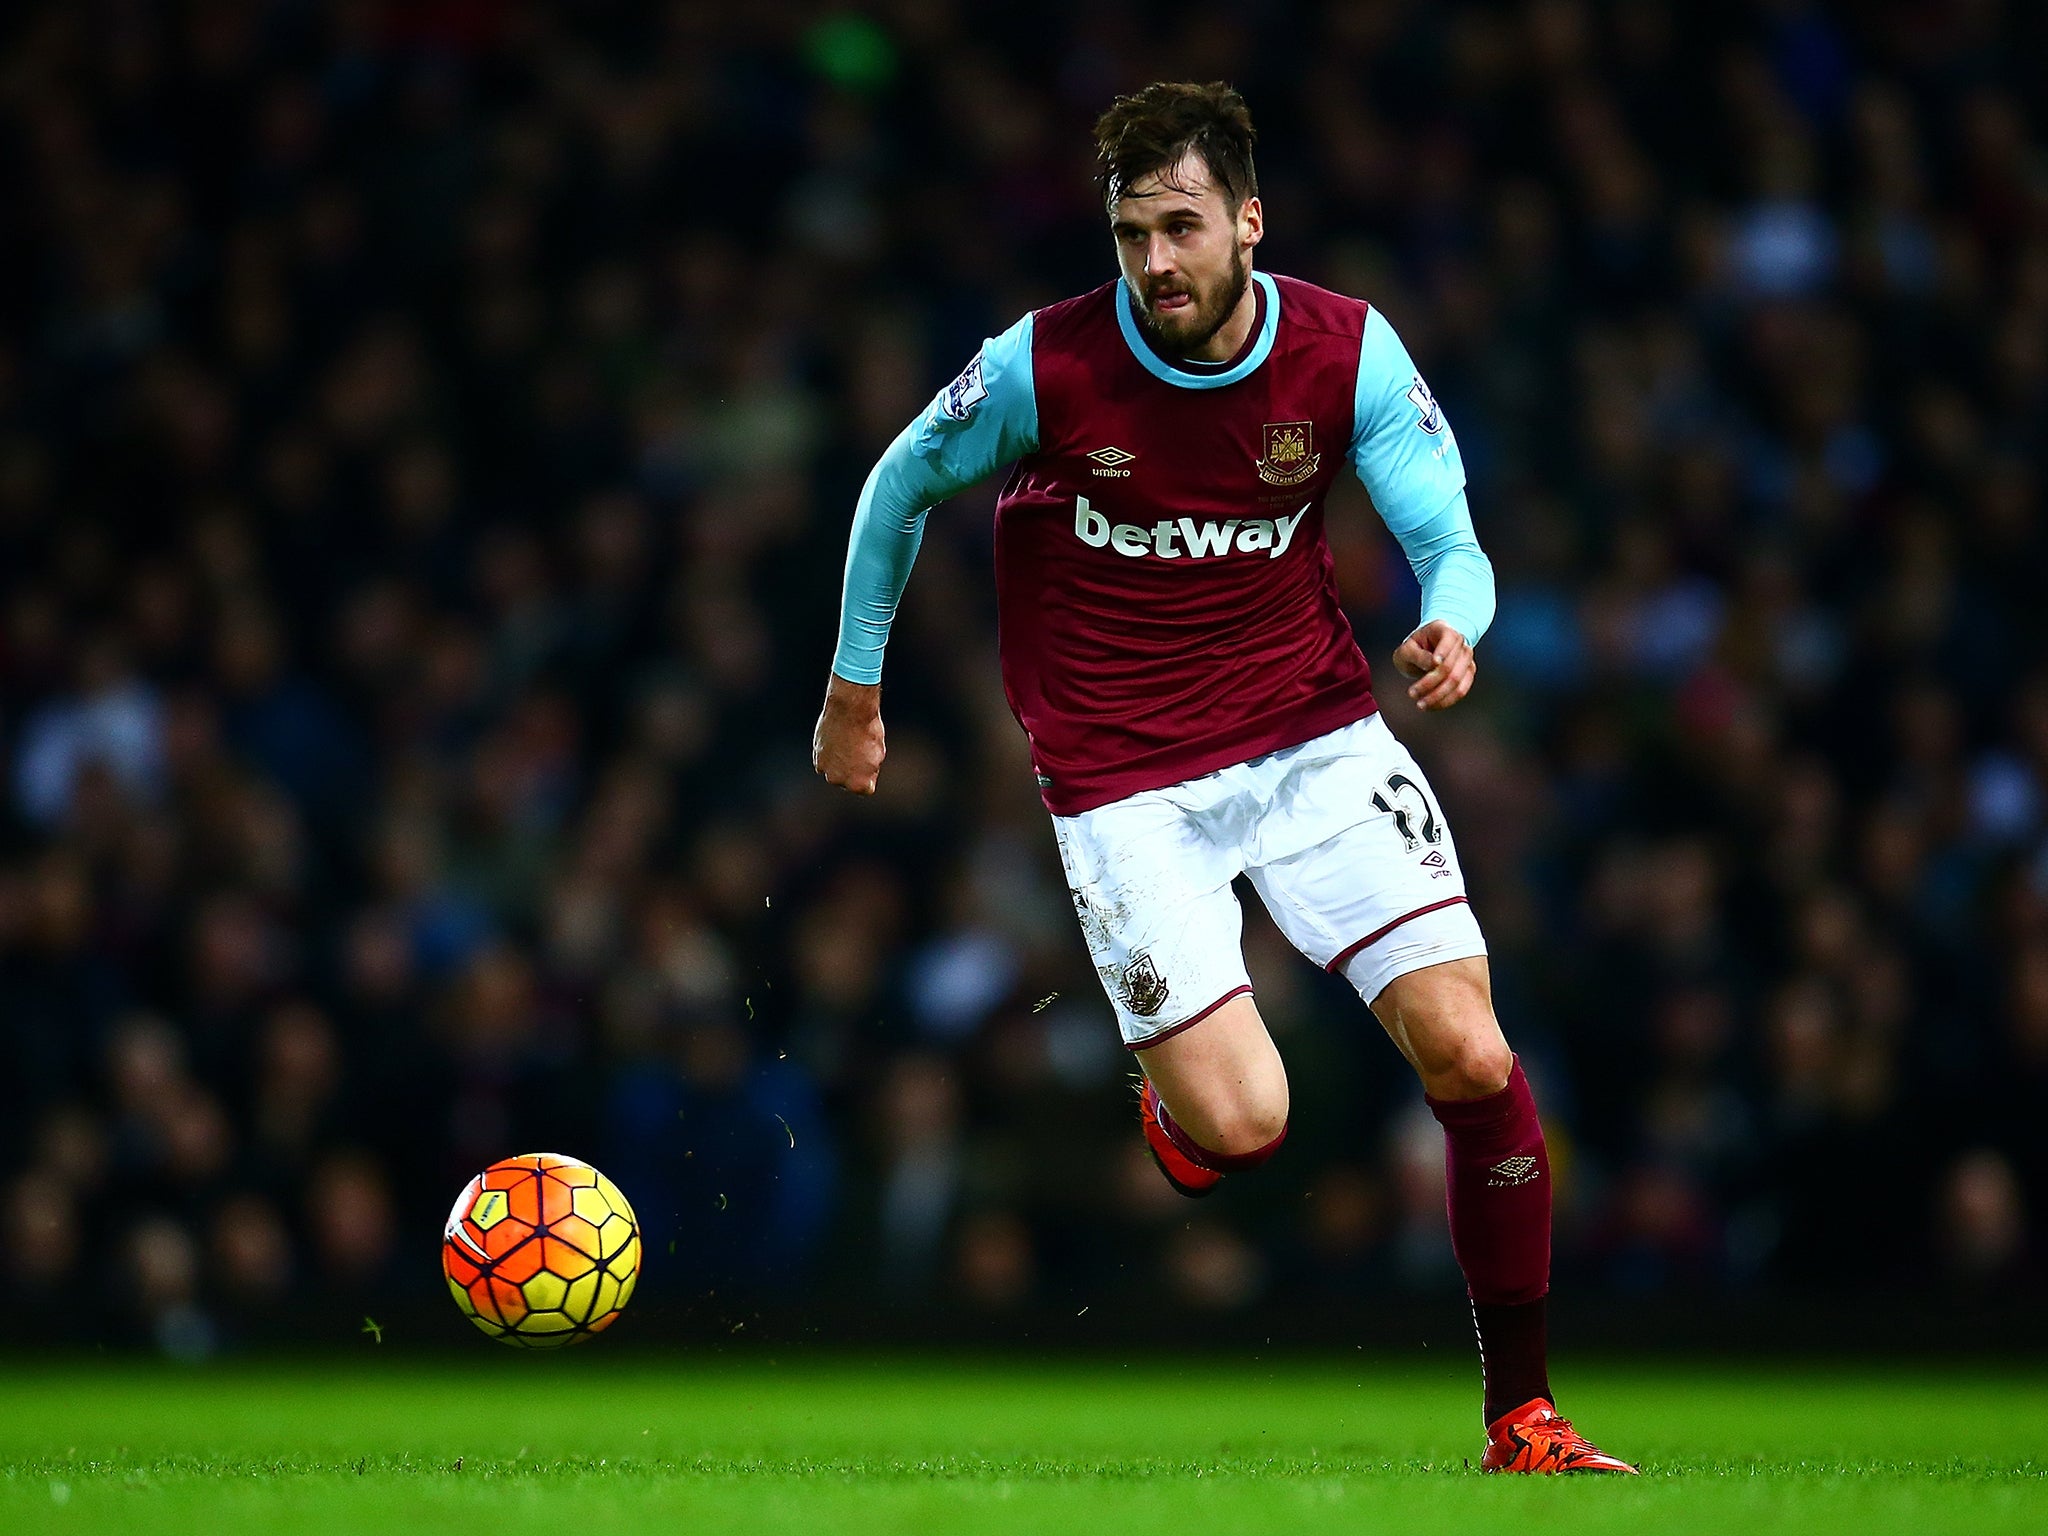 Jenkinson played under Palace boss Sam Allardyce during a loan spell at West Ham (Getty)